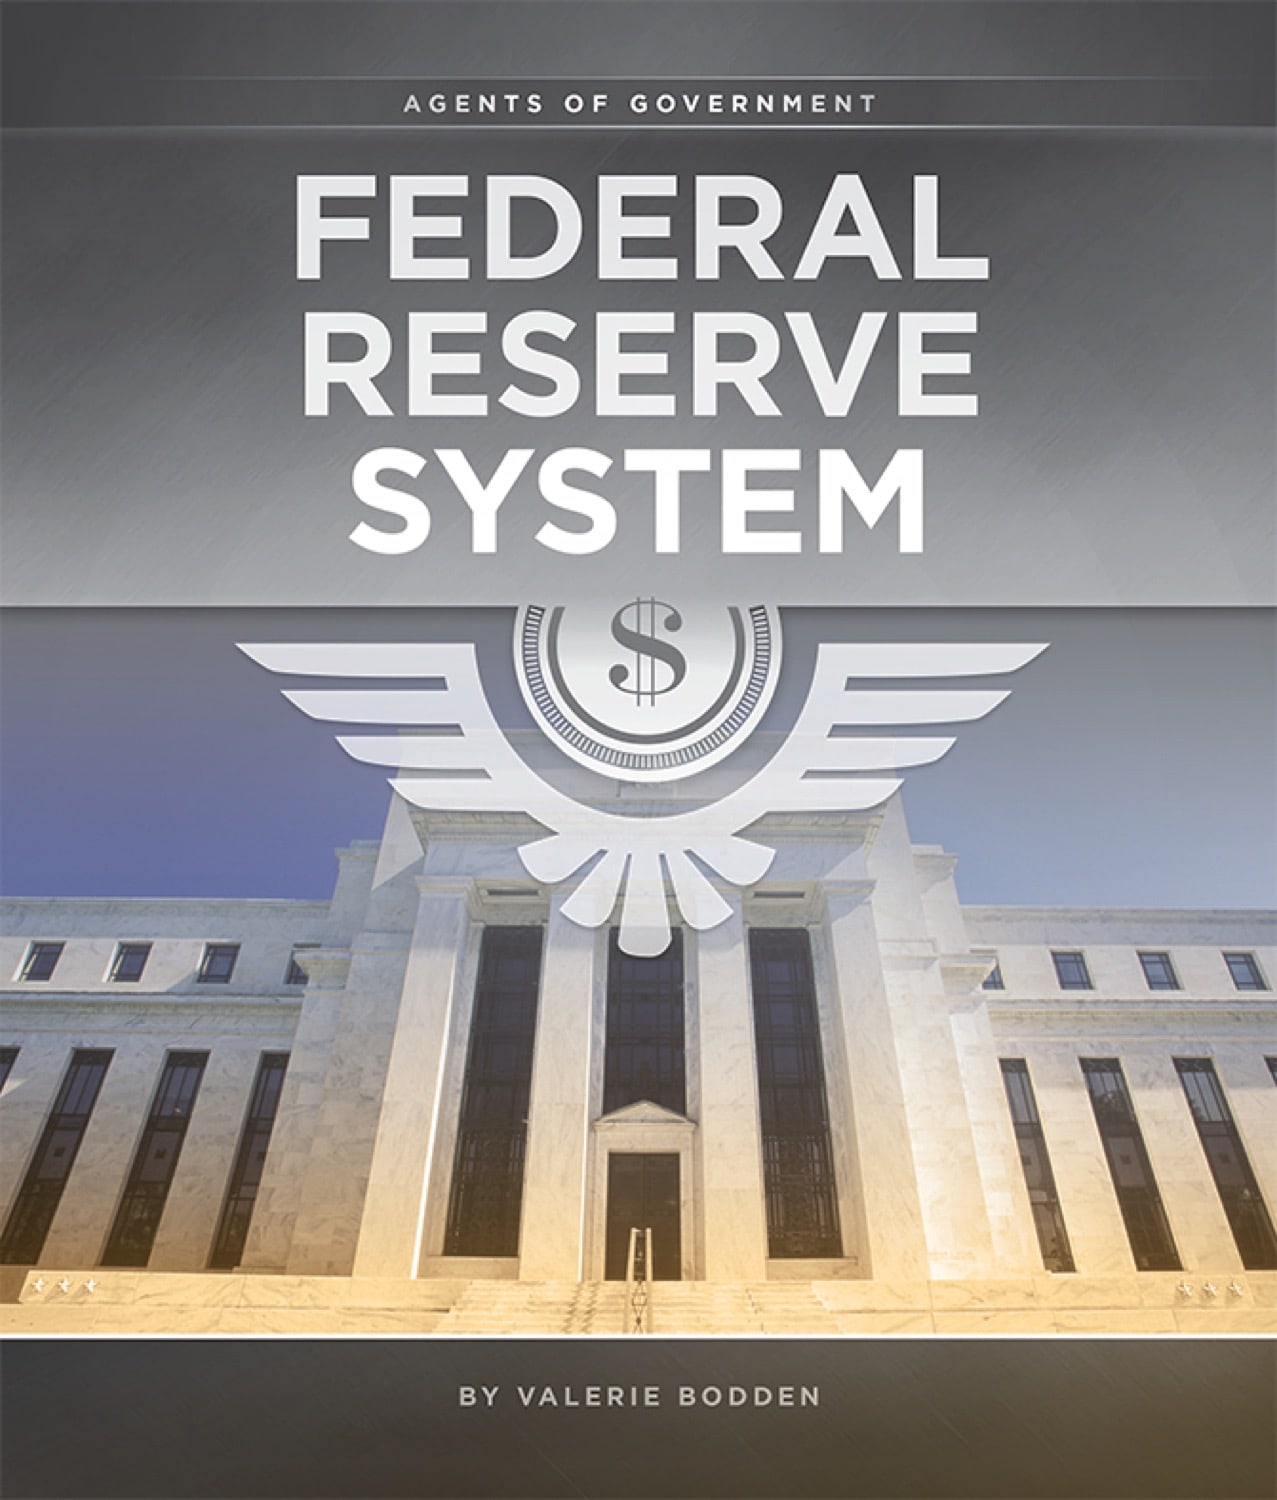 Agents of Government: Federal Reserve System  by The Creative Company Shop